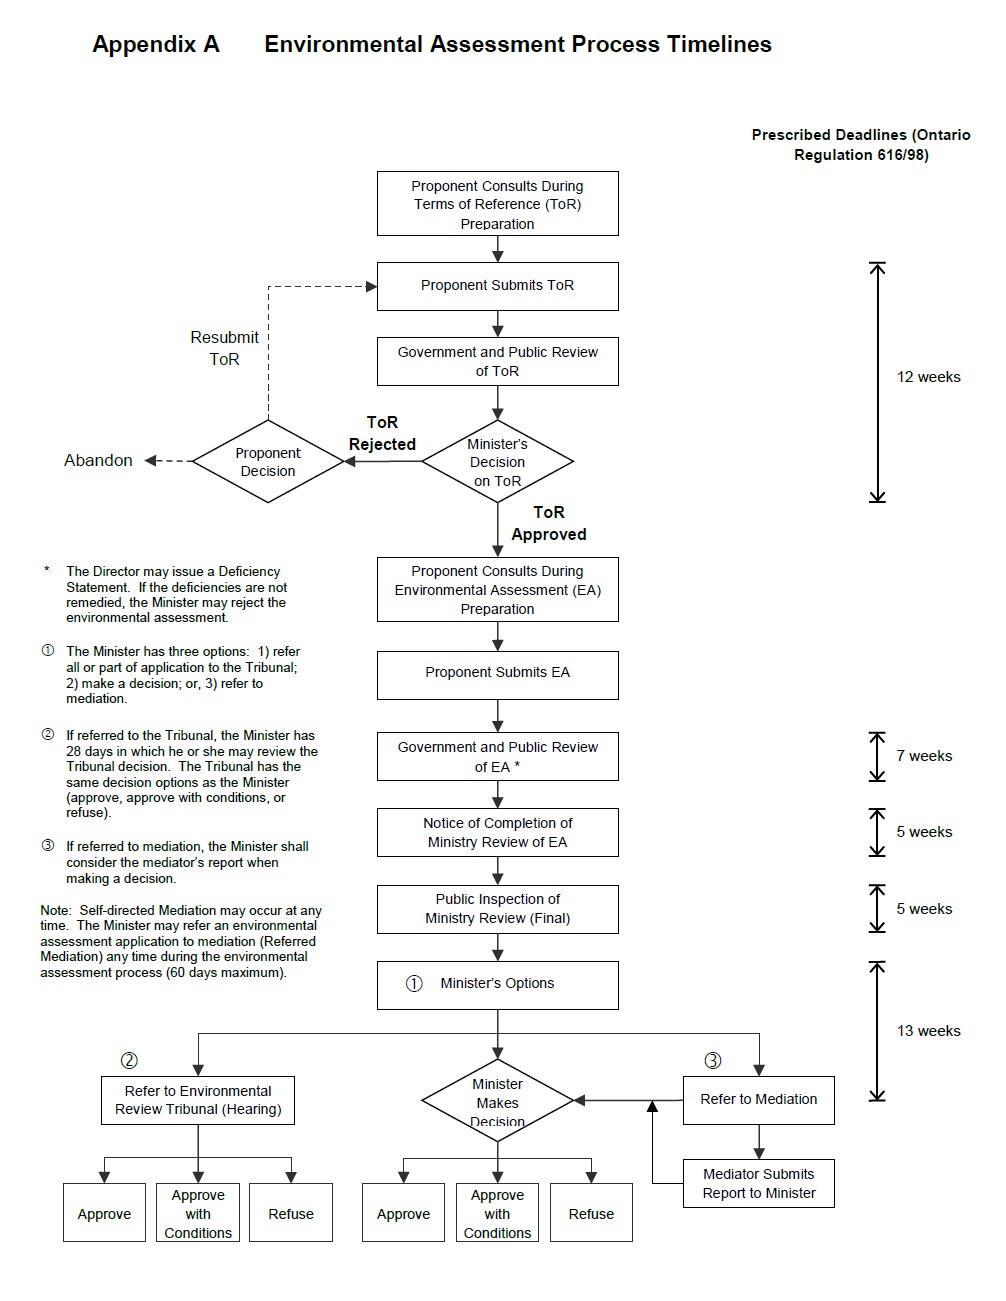 Image shows the flowchart for environmental assessment process timelines